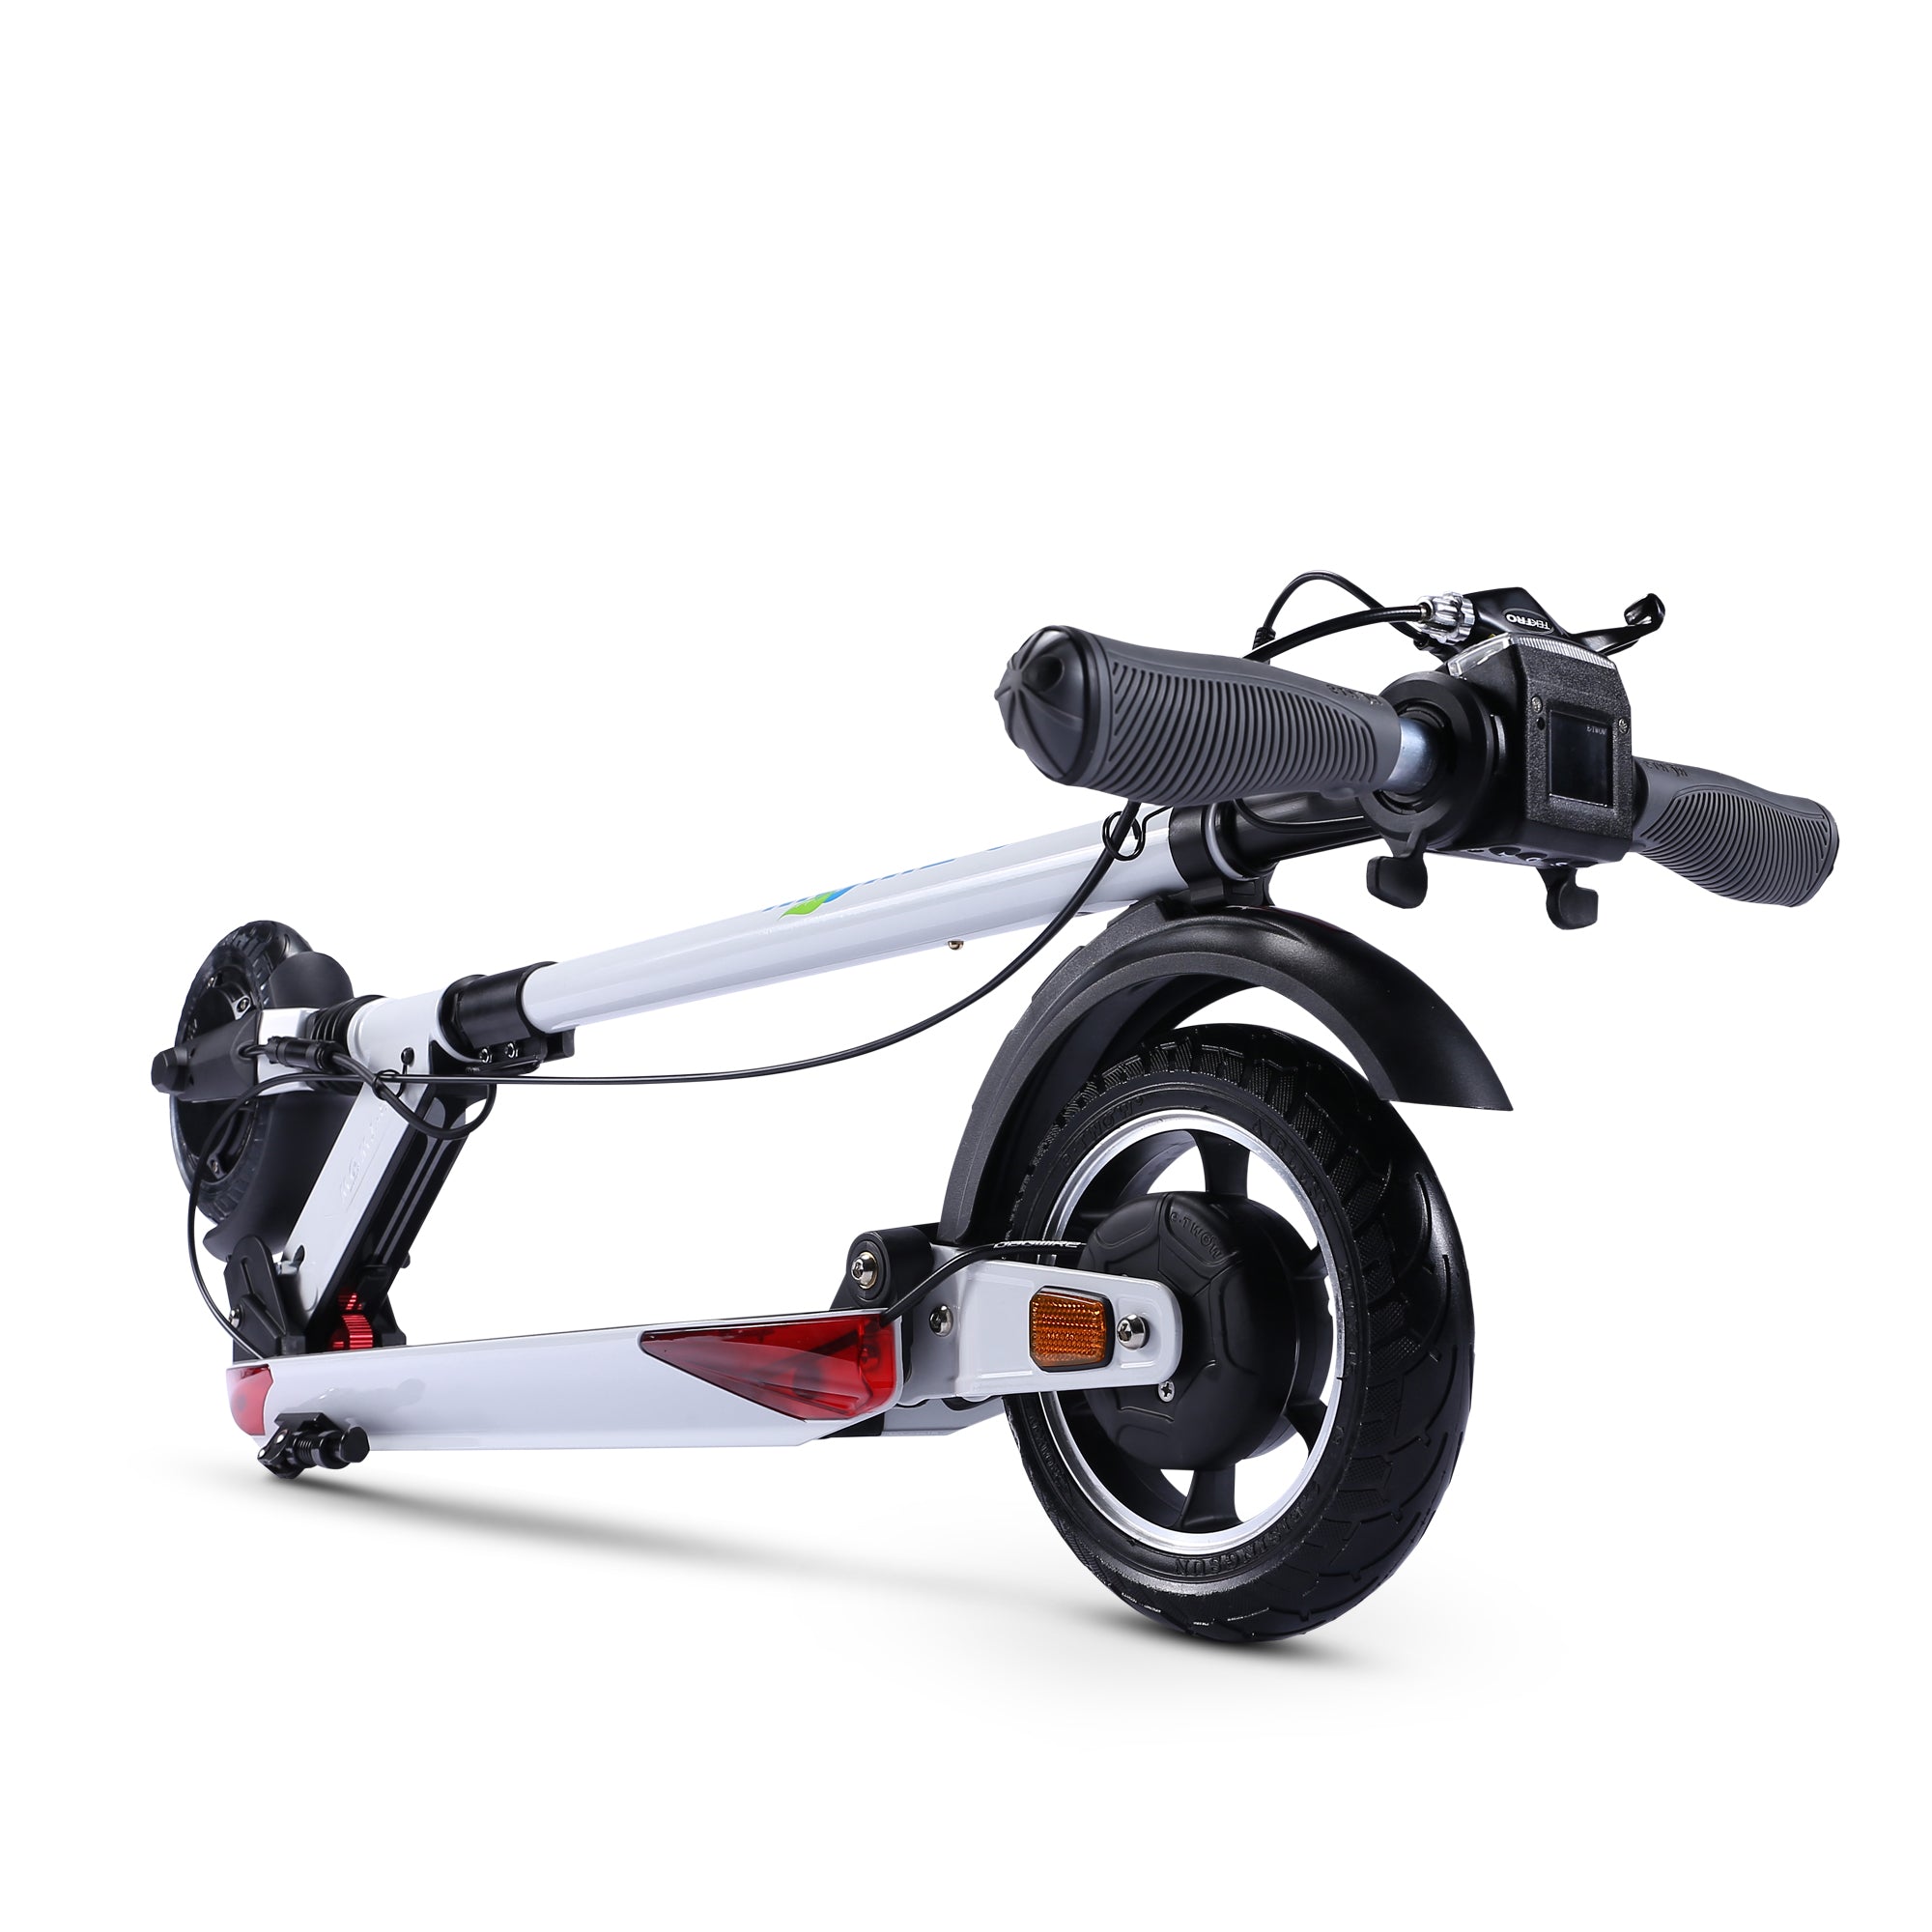 Buy The New GT which is top of the line for electric scooters.